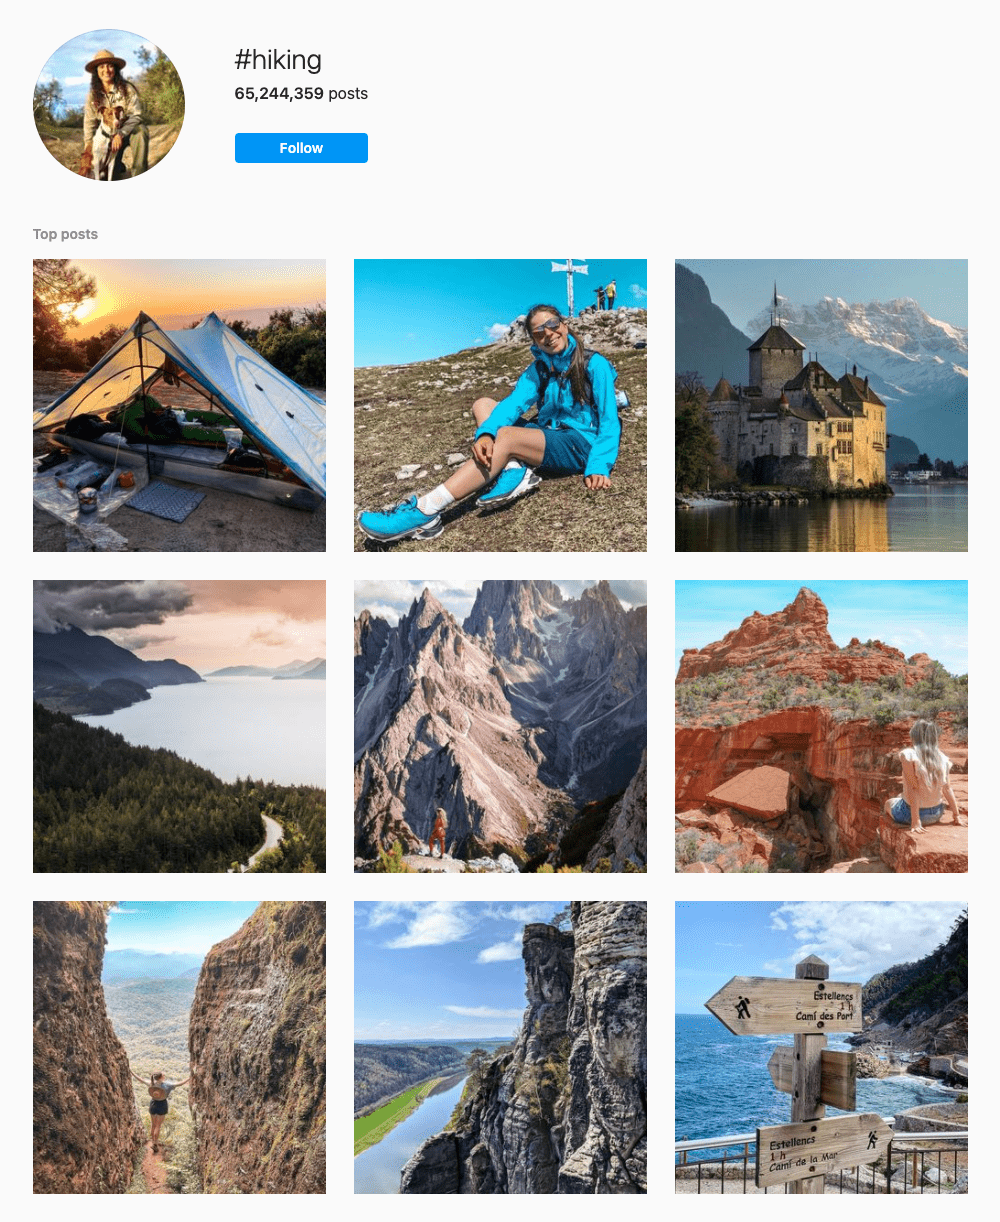 #hiking Hashtags for Instagram